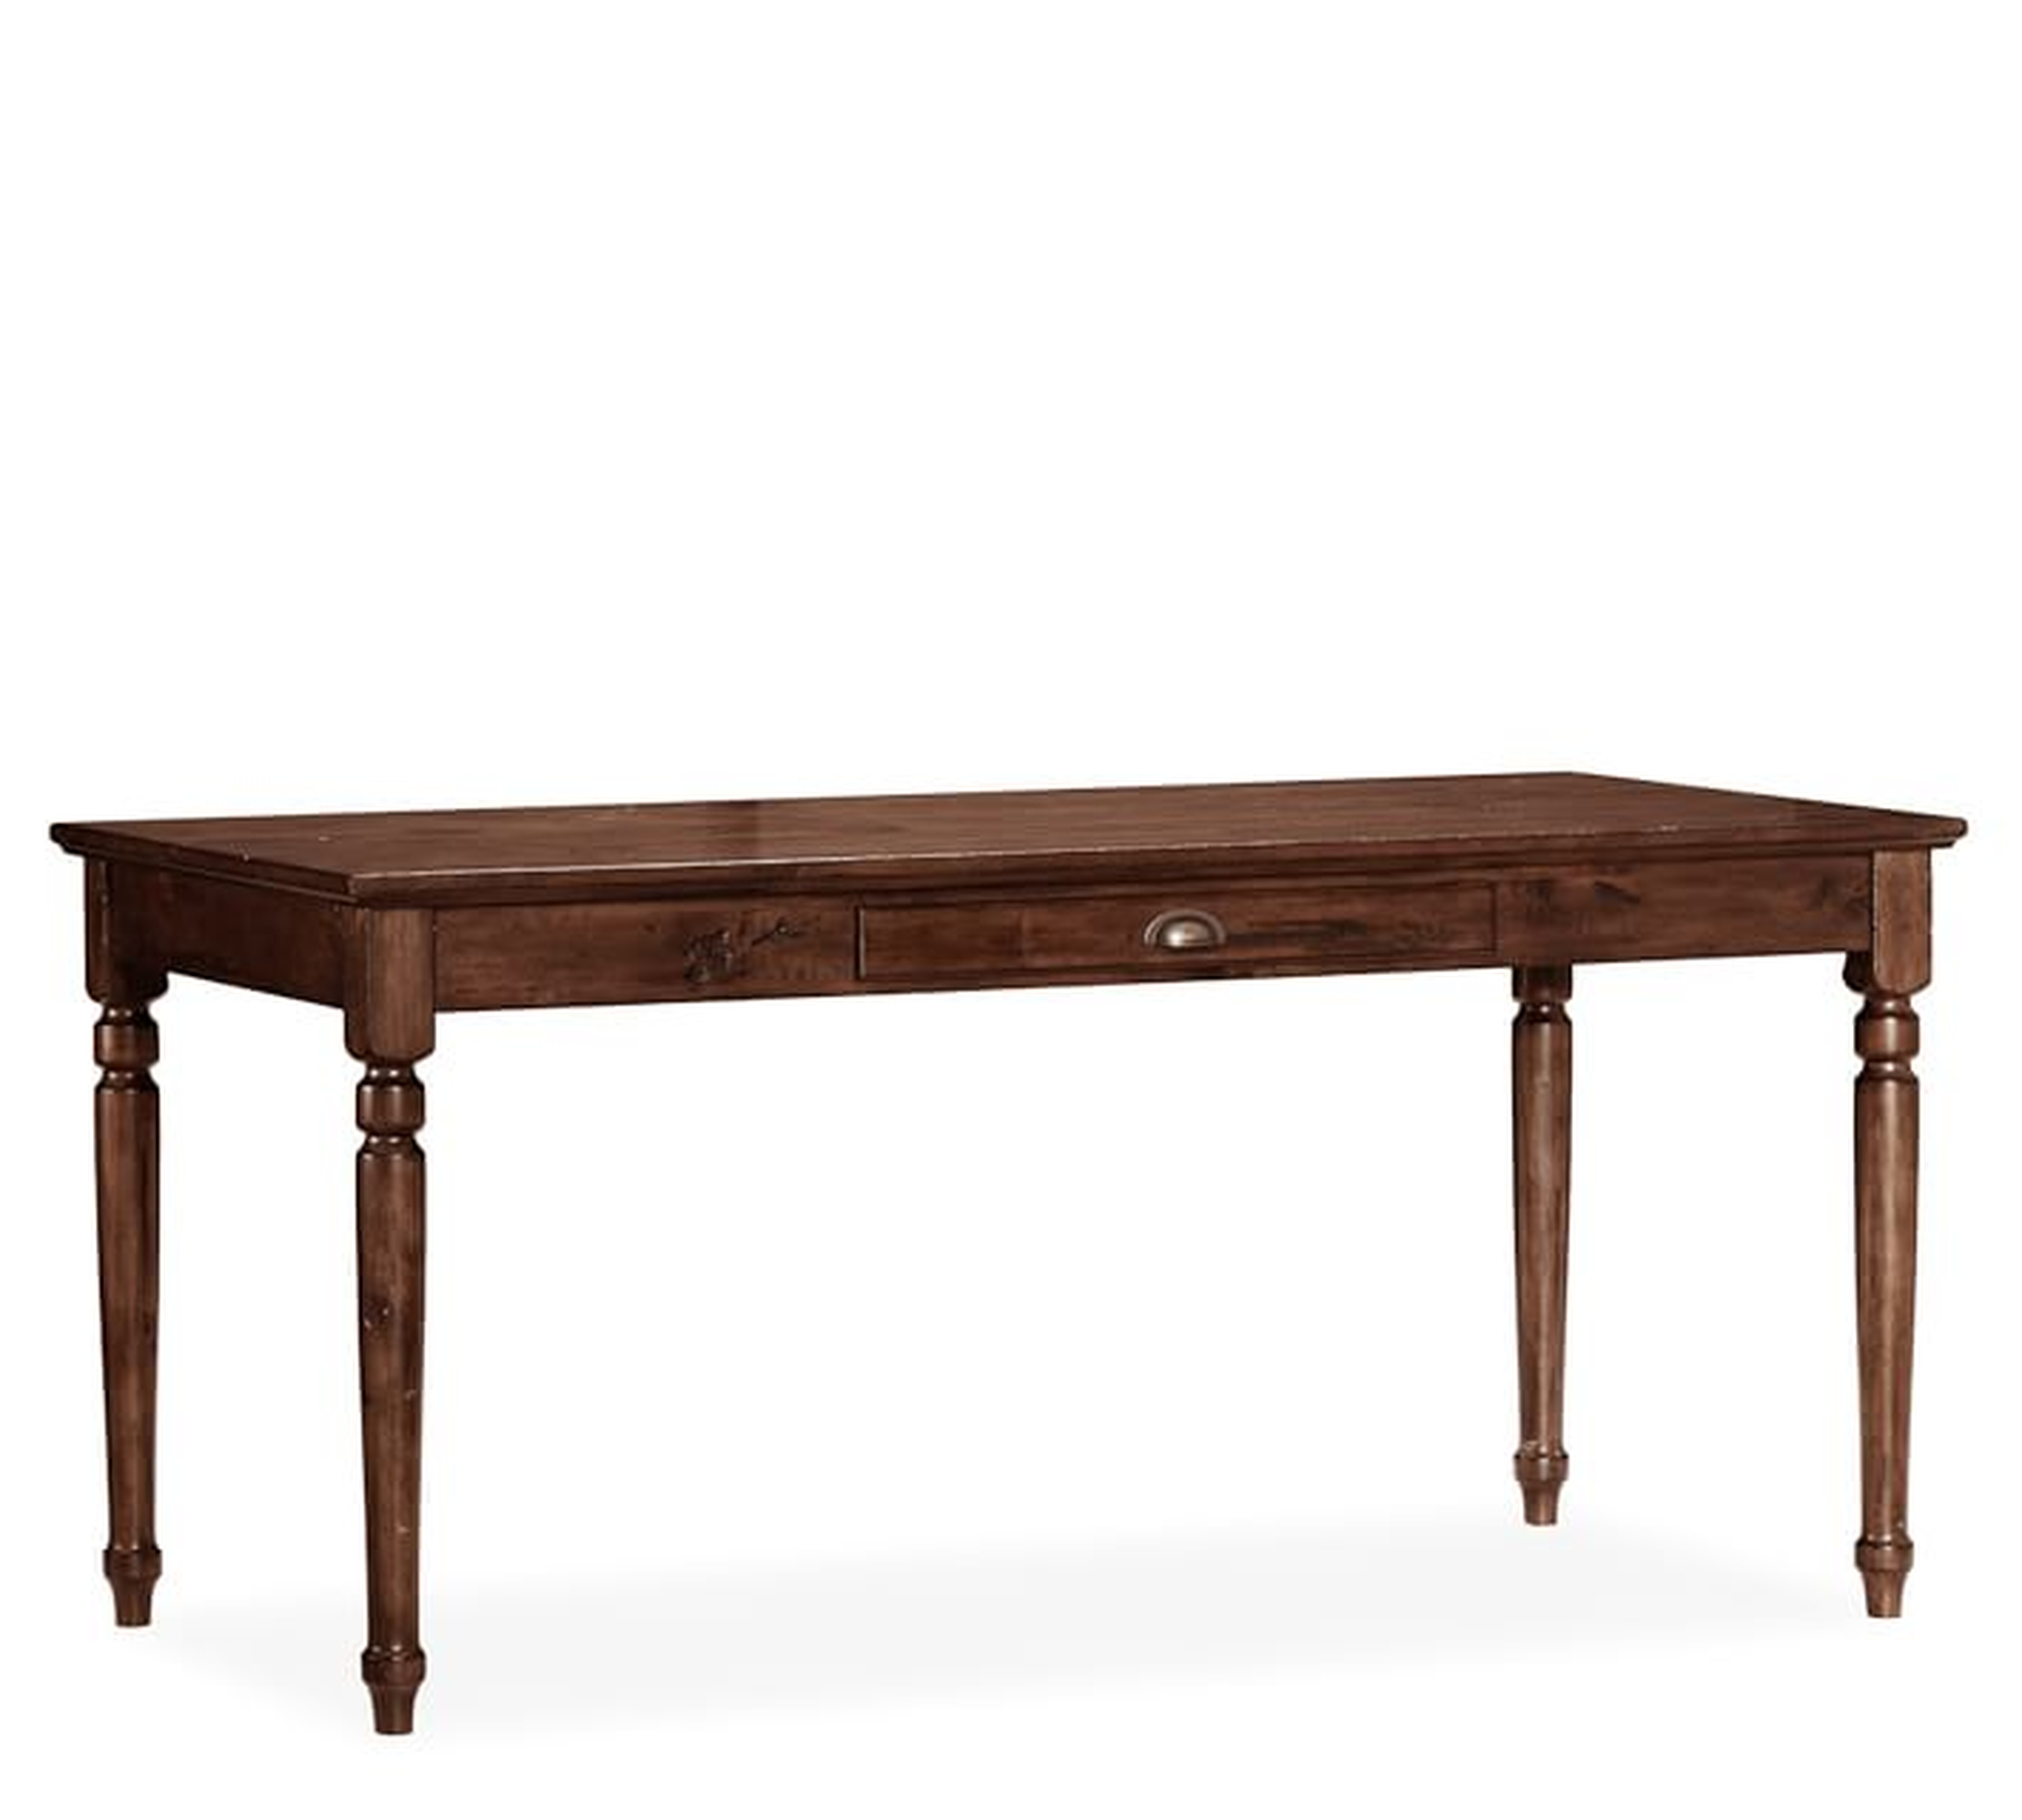 Printer's 64" Writing Desk with Drawer, Tuscan Chestnut - Pottery Barn